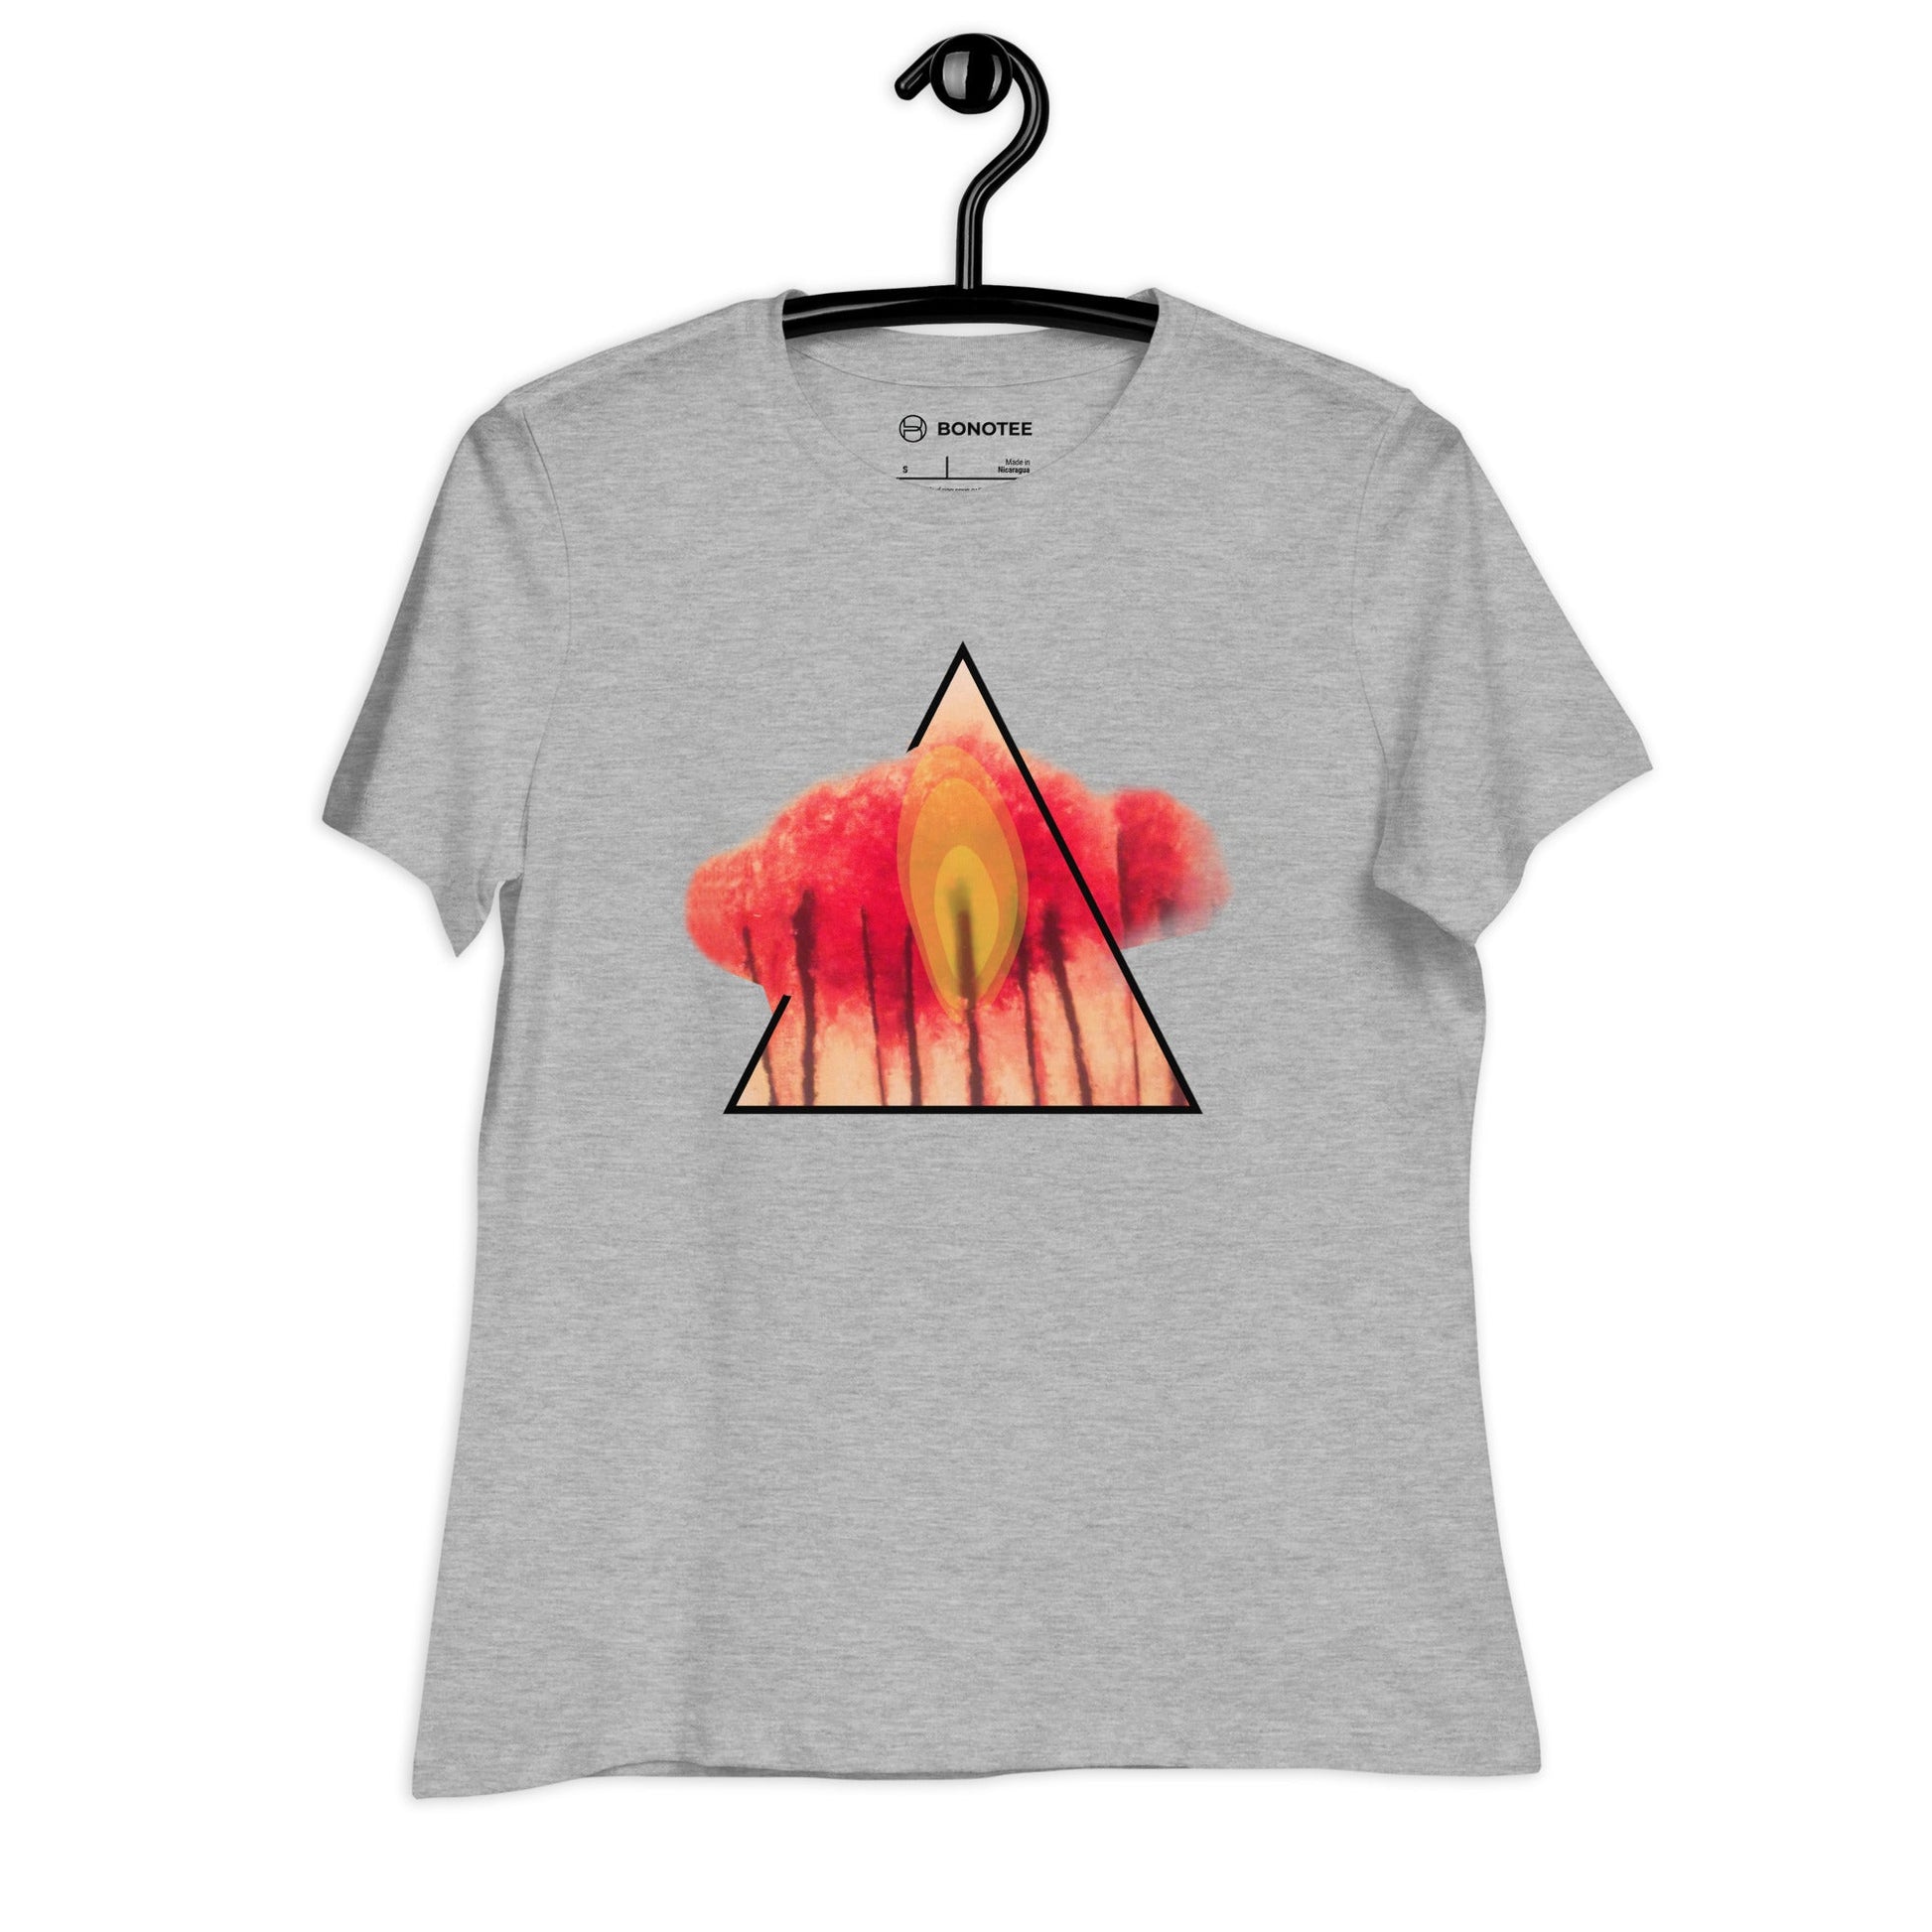 Crew Neck Women's Relaxed Fit T - Shirt FIRE - BONOTEE